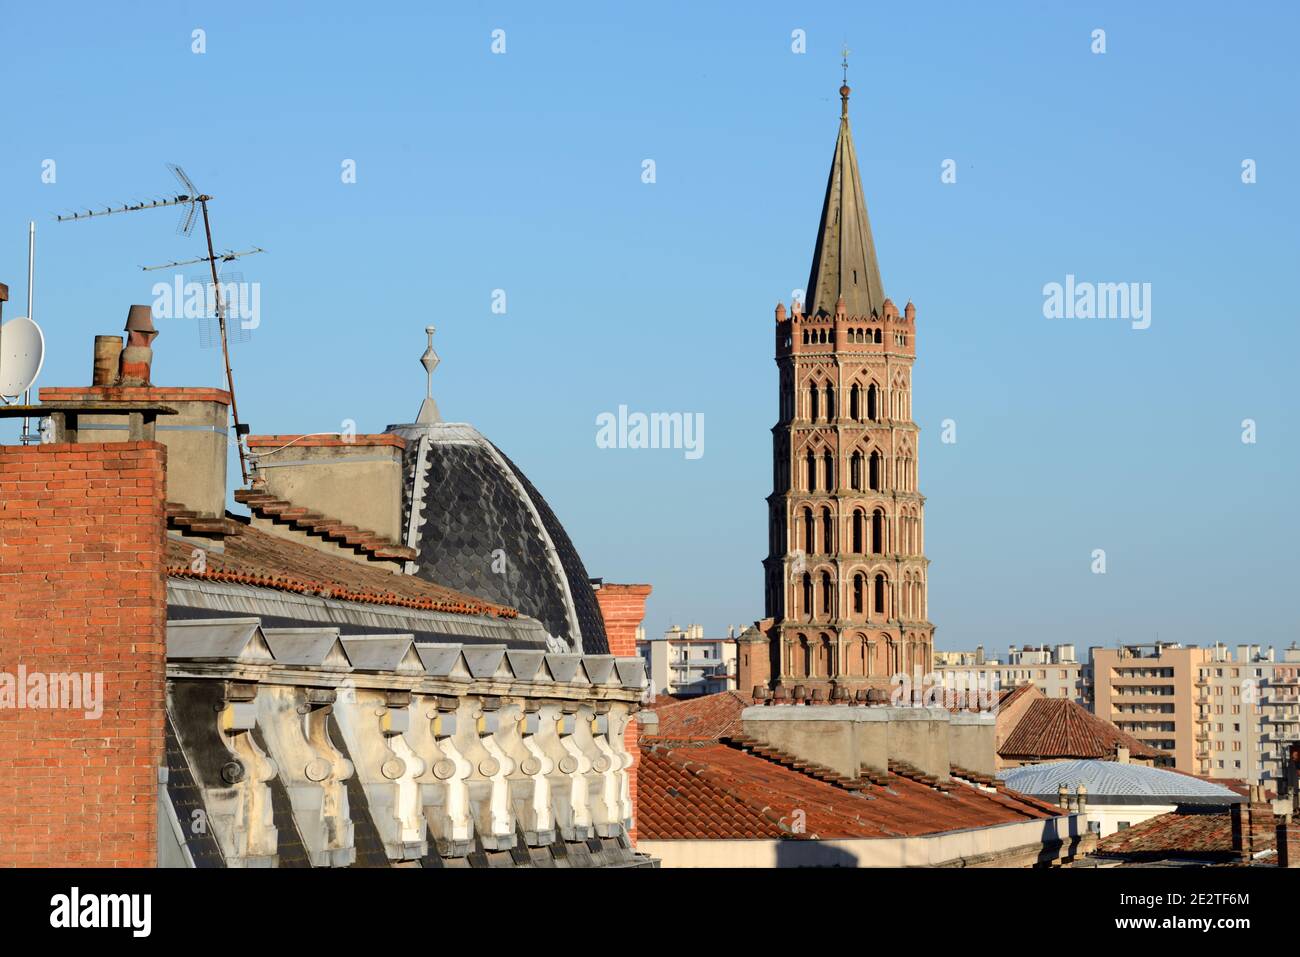 View Over the Rooftops & Skyline of the Old Town, Historic District or Town Centre & Spire of the Basilica of Saint Sernin Church Toulouse France Stock Photo